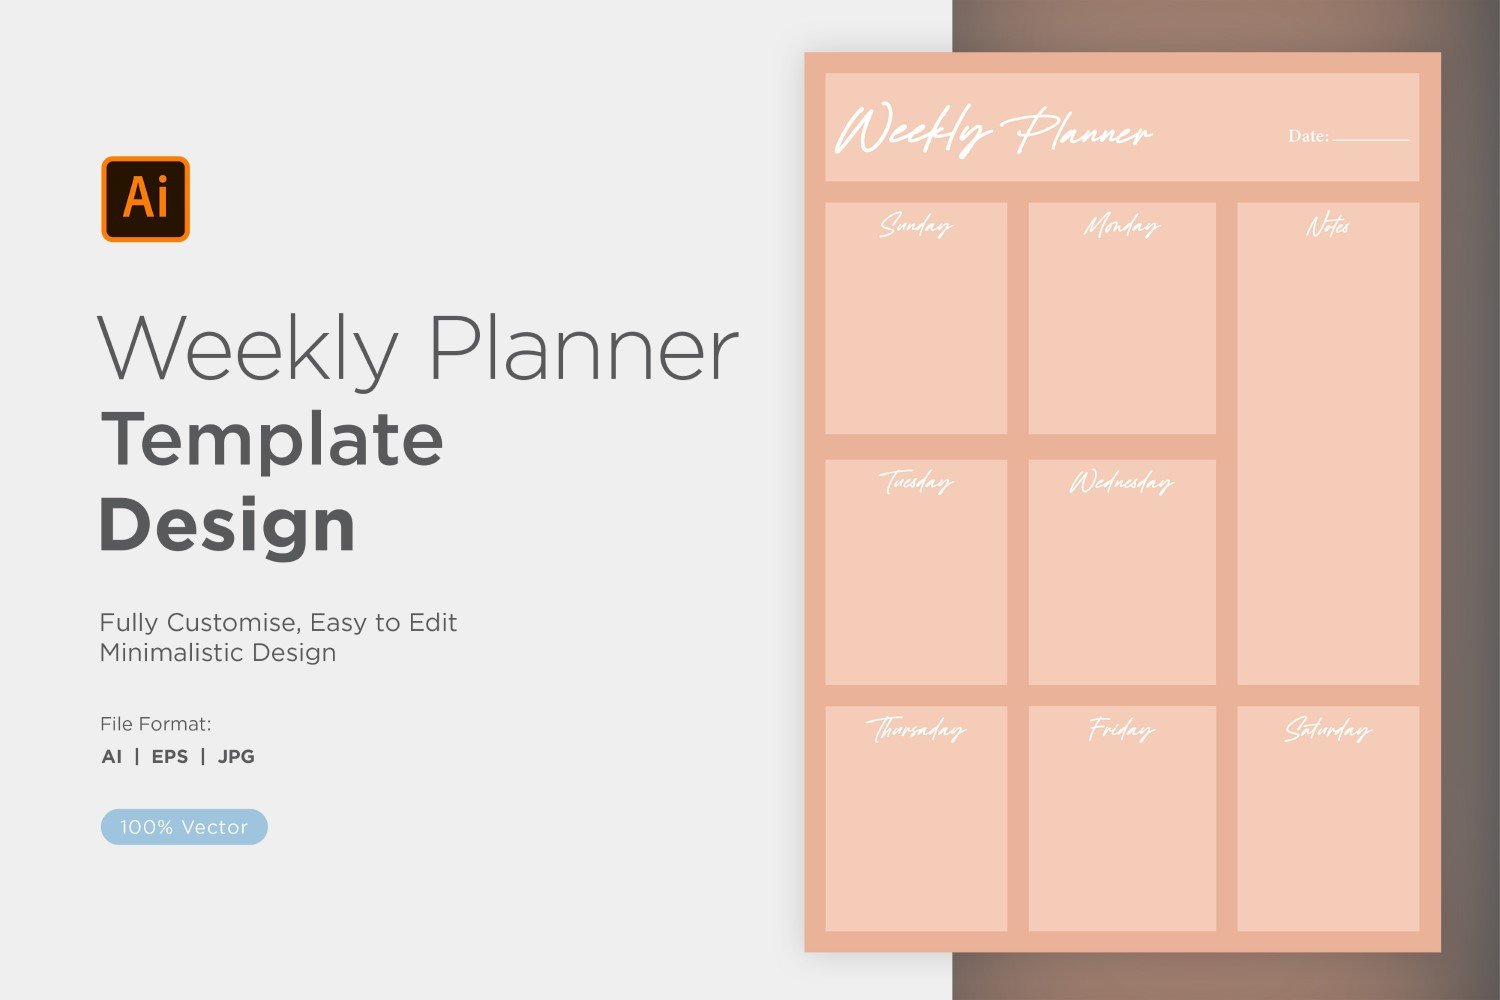 Kit Graphique #357858 Weekly Planner Divers Modles Web - Logo template Preview